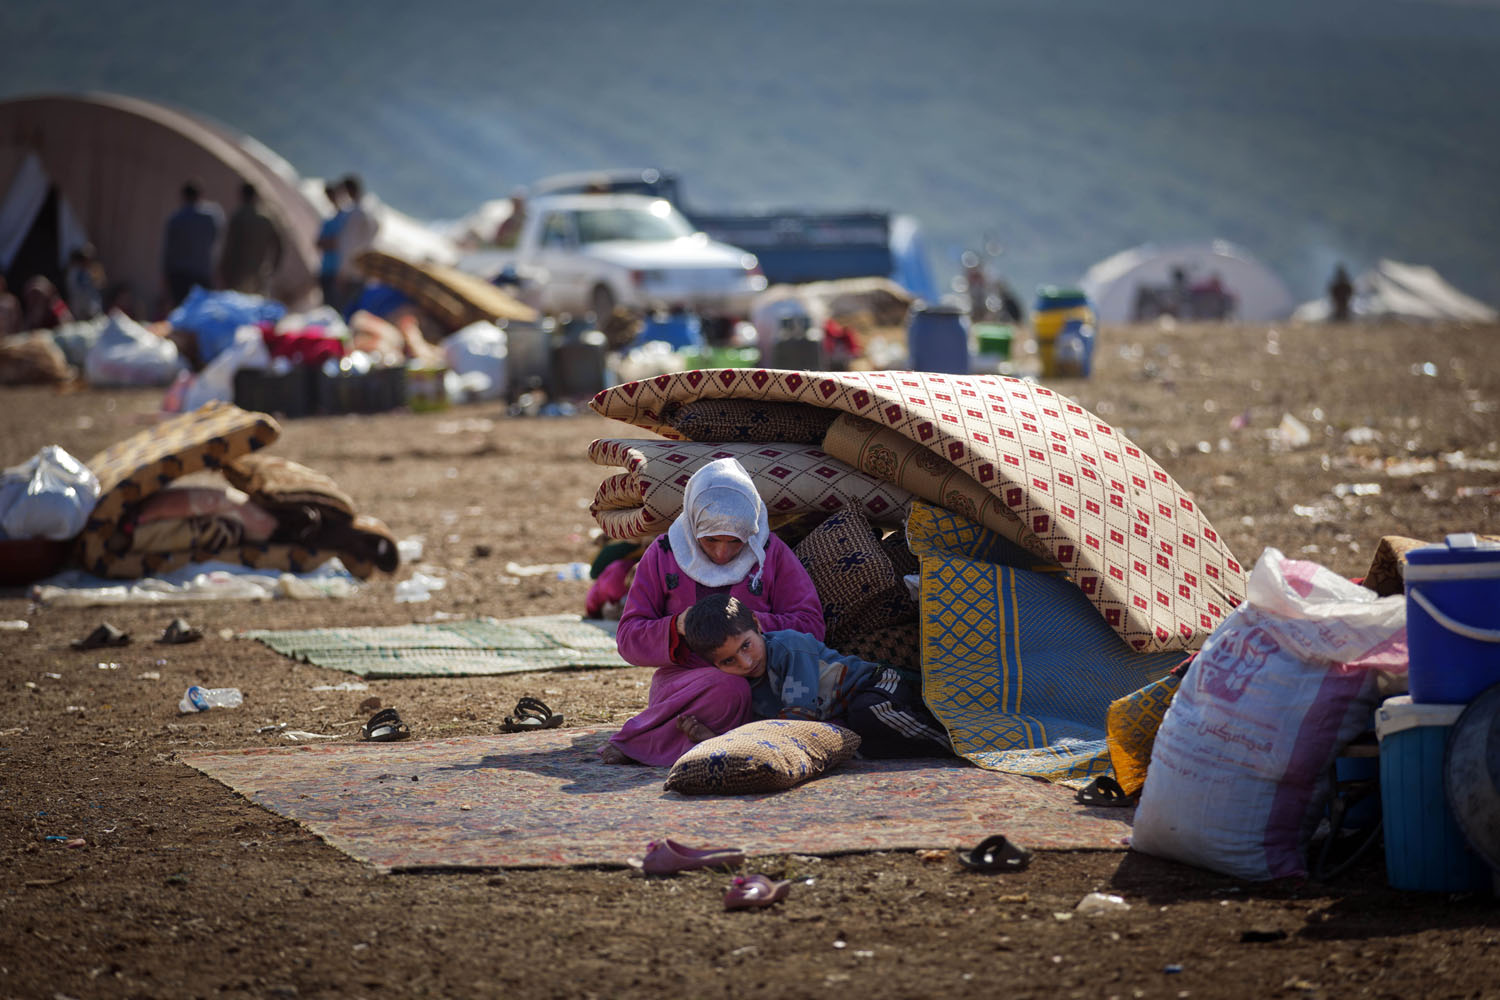 Image: Nov. 7, 2012. A Syrian family who fled from the violence in their village sit next to their belongings at a displacement camp in the Syrian village of Atma.